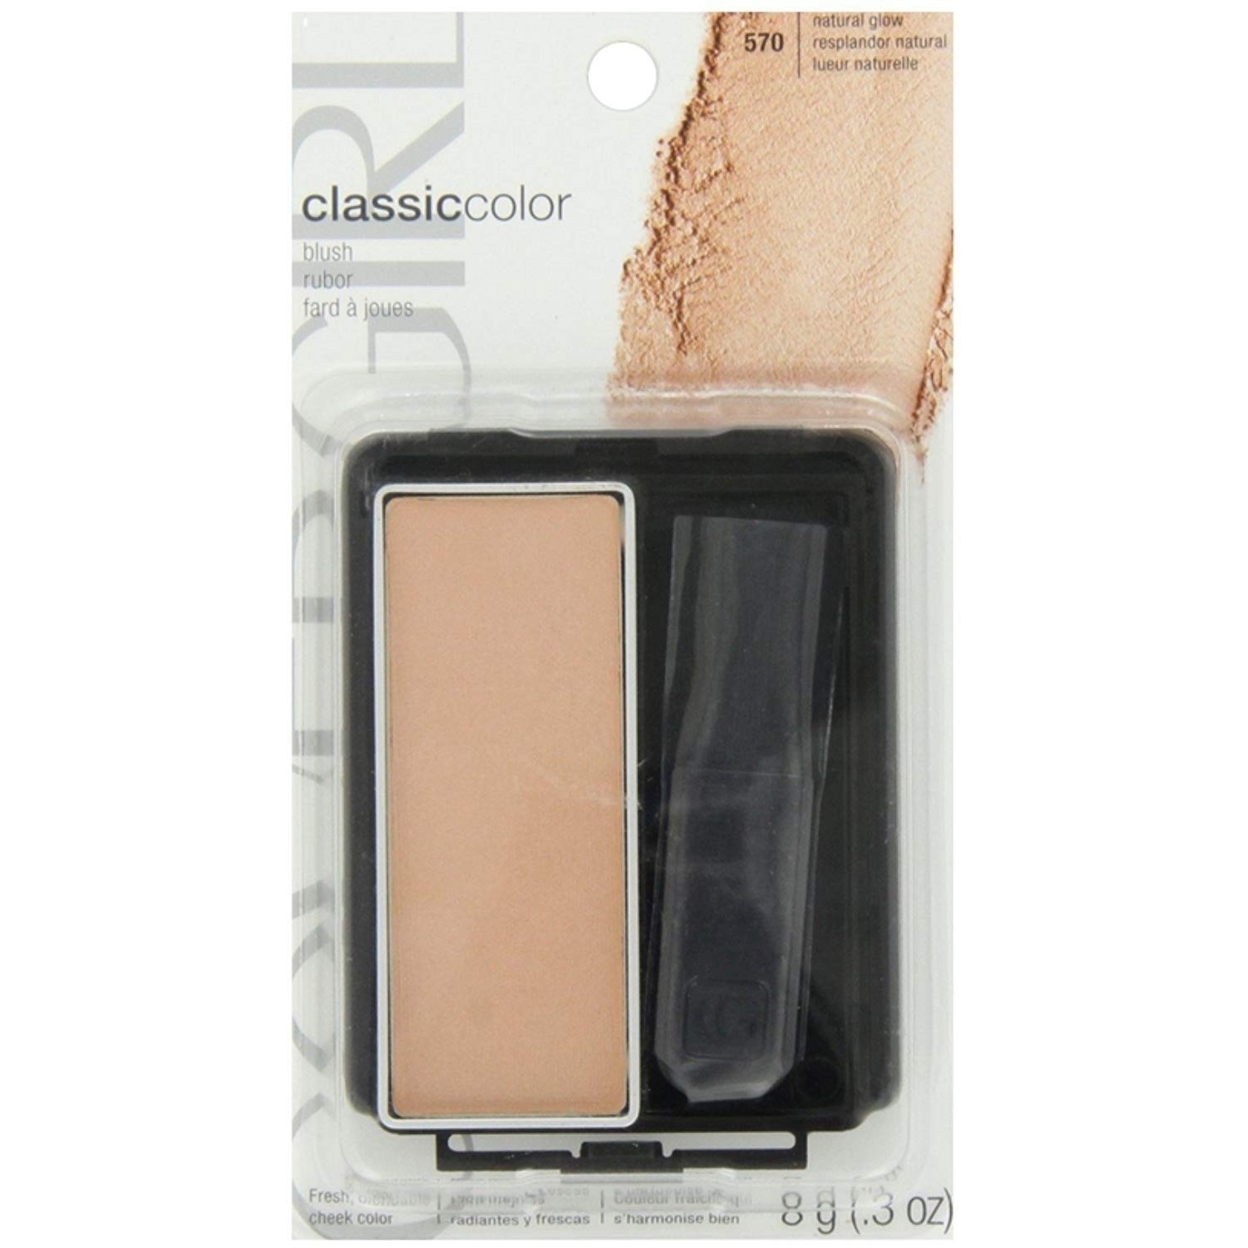 CoverGirl Classic Color Blush, Natural Glow [570], 0.3 Oz